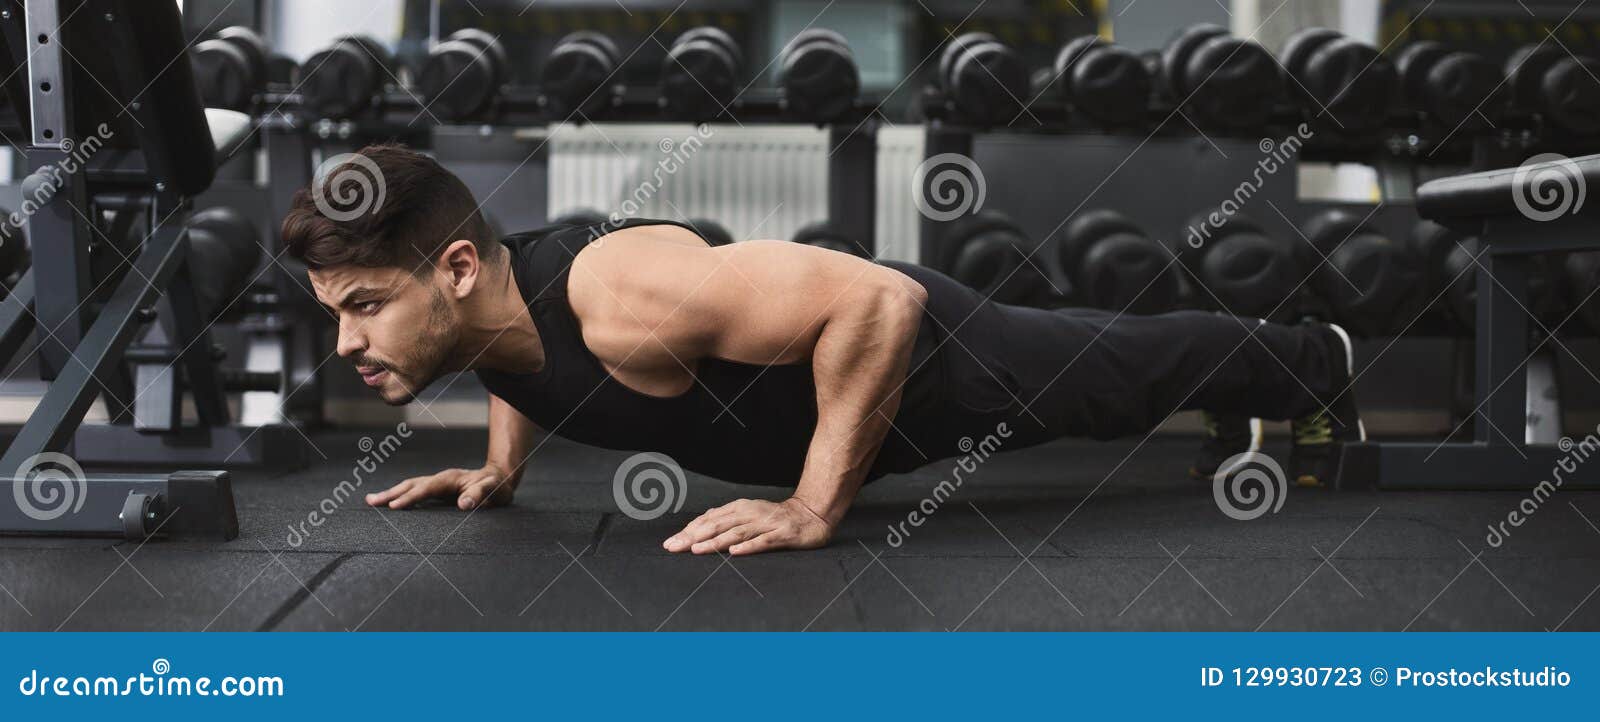 Arab Man In Sportswear Doing Push Up At Gym Stock Image Image Of Blank Energy 129930723